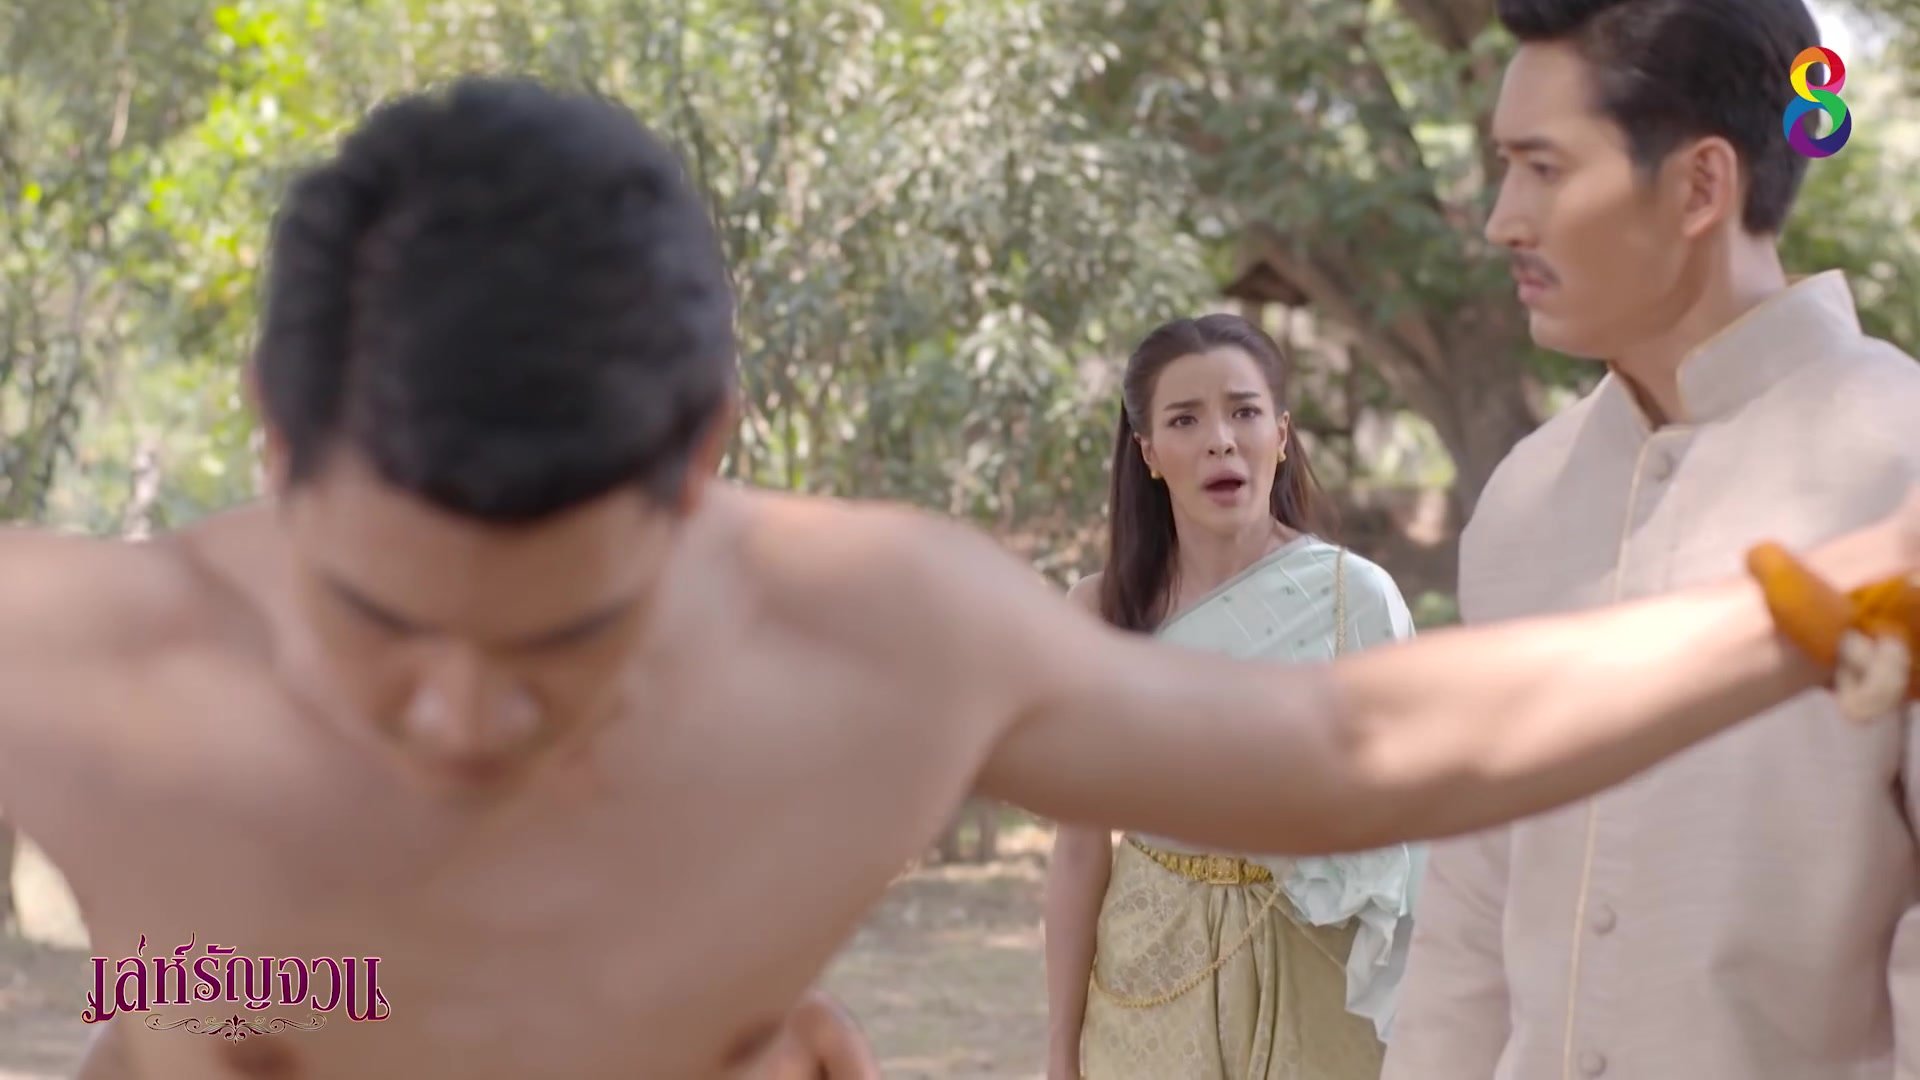 Whipping scene from a Thai TV series